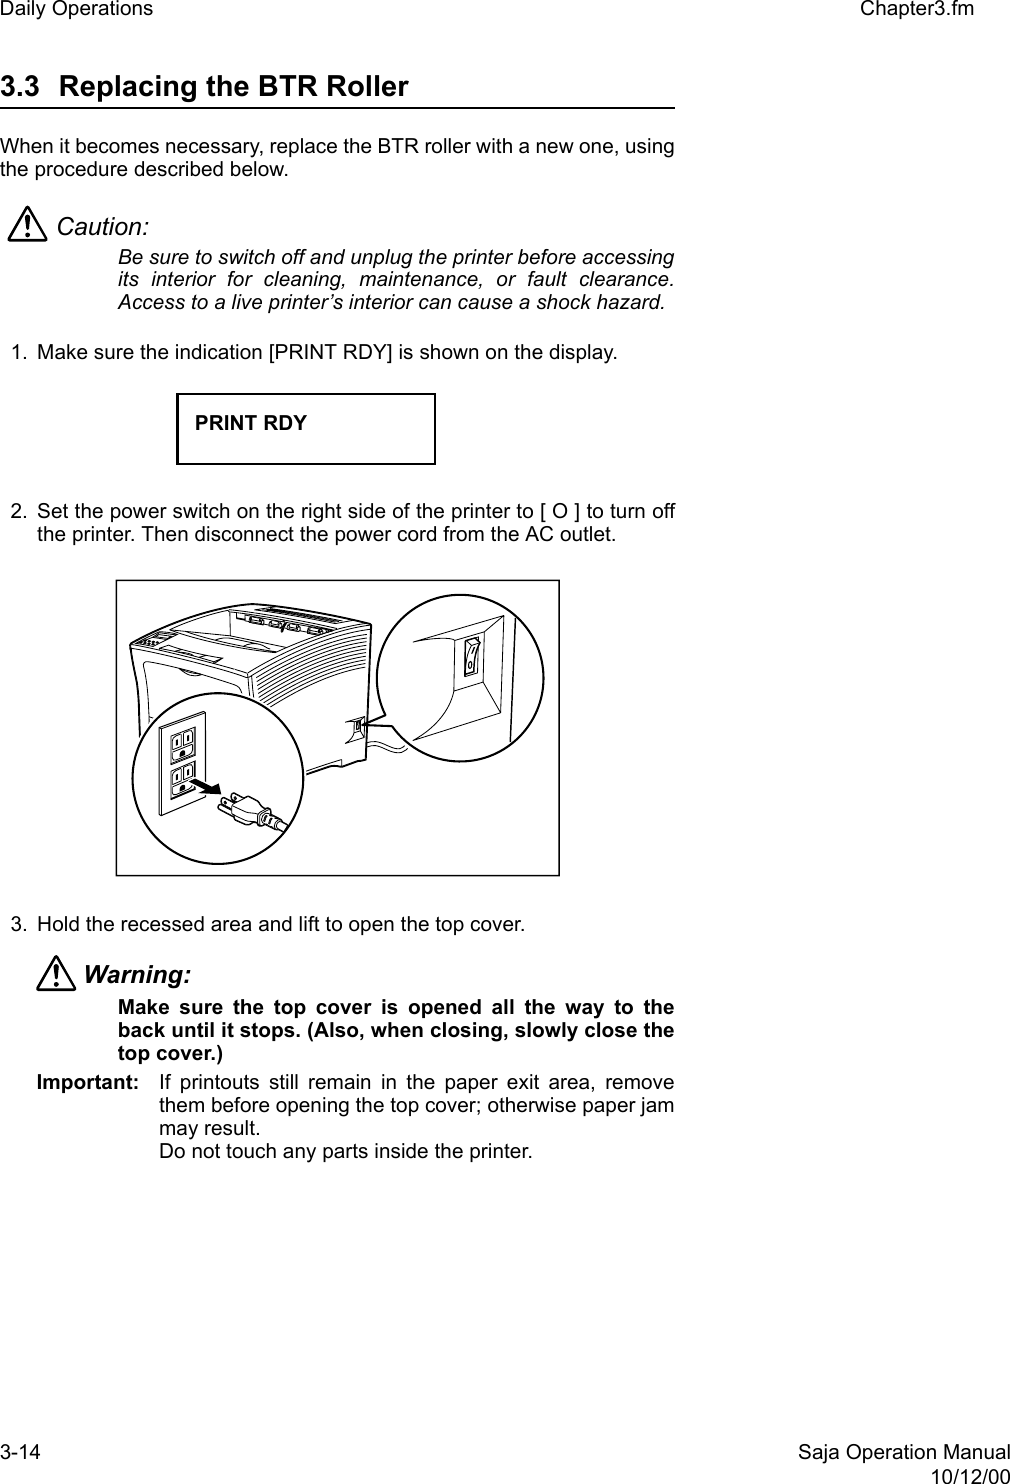 3-14 Saja Operation Manual10/12/00Daily Operations Chapter3.fm3.3 Replacing the BTR RollerWhen it becomes necessary, replace the BTR roller with a new one, usingthe procedure described below.Caution: Be sure to switch off and unplug the printer before accessingits interior for cleaning, maintenance, or fault clearance.Access to a live printer’s interior can cause a shock hazard.1. Make sure the indication [PRINT RDY] is shown on the display. 2. Set the power switch on the right side of the printer to [ O ] to turn offthe printer. Then disconnect the power cord from the AC outlet.3. Hold the recessed area and lift to open the top cover.Warning: Make sure the top cover is opened all the way to theback until it stops. (Also, when closing, slowly close thetop cover.) Important: If printouts still remain in the paper exit area, removethem before opening the top cover; otherwise paper jammay result.Do not touch any parts inside the printer. PRINT RDY